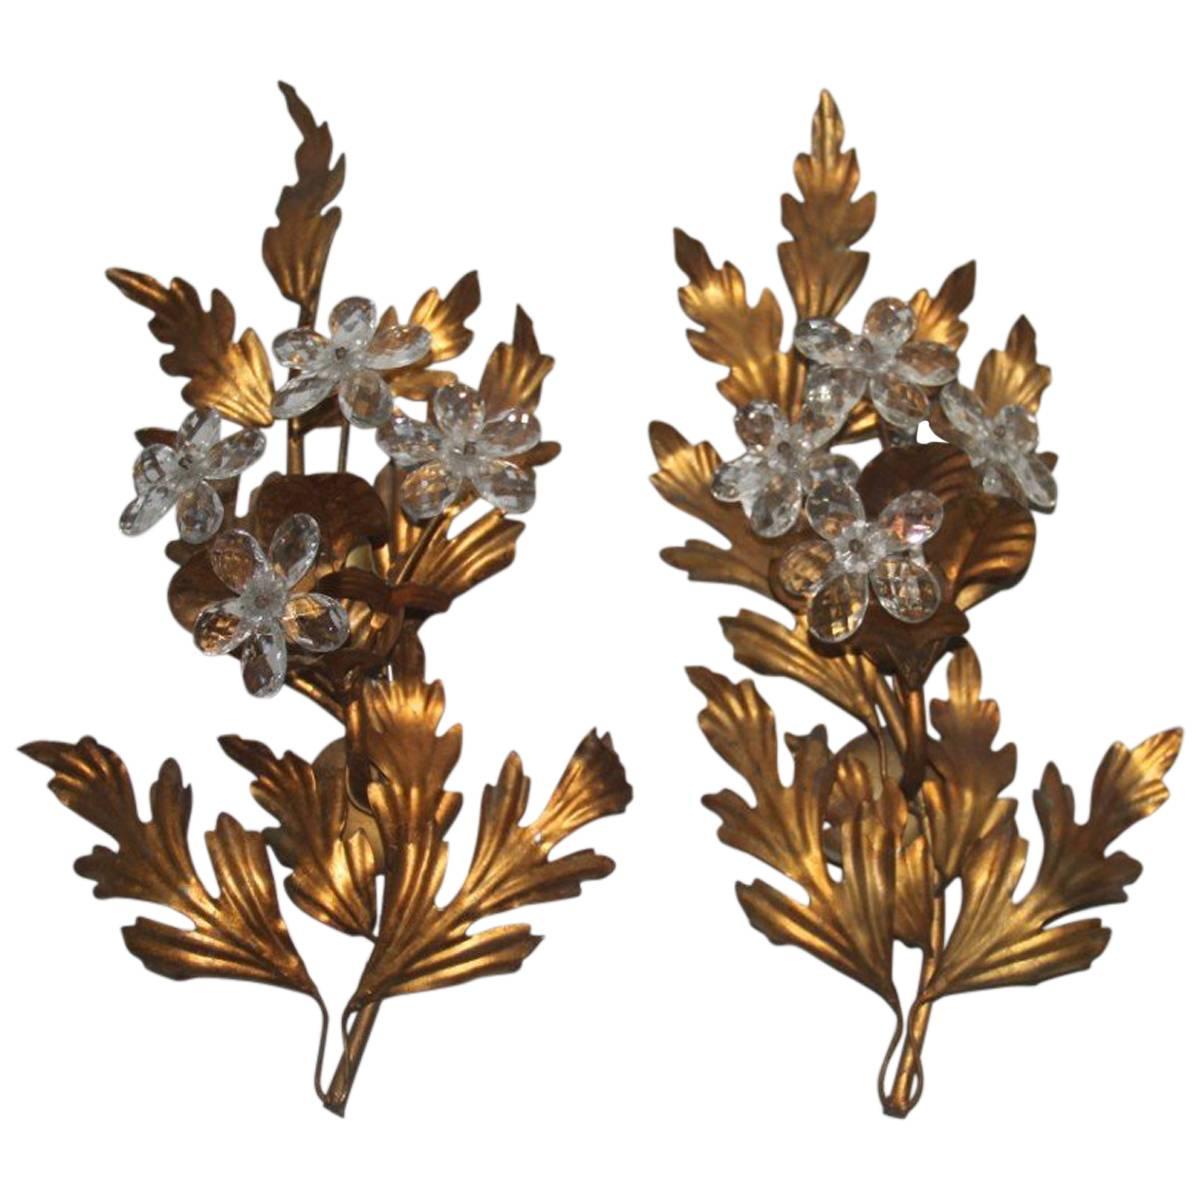 Pair of Sculpture Metal Sconces Crystal Design, 1950s, French For Sale